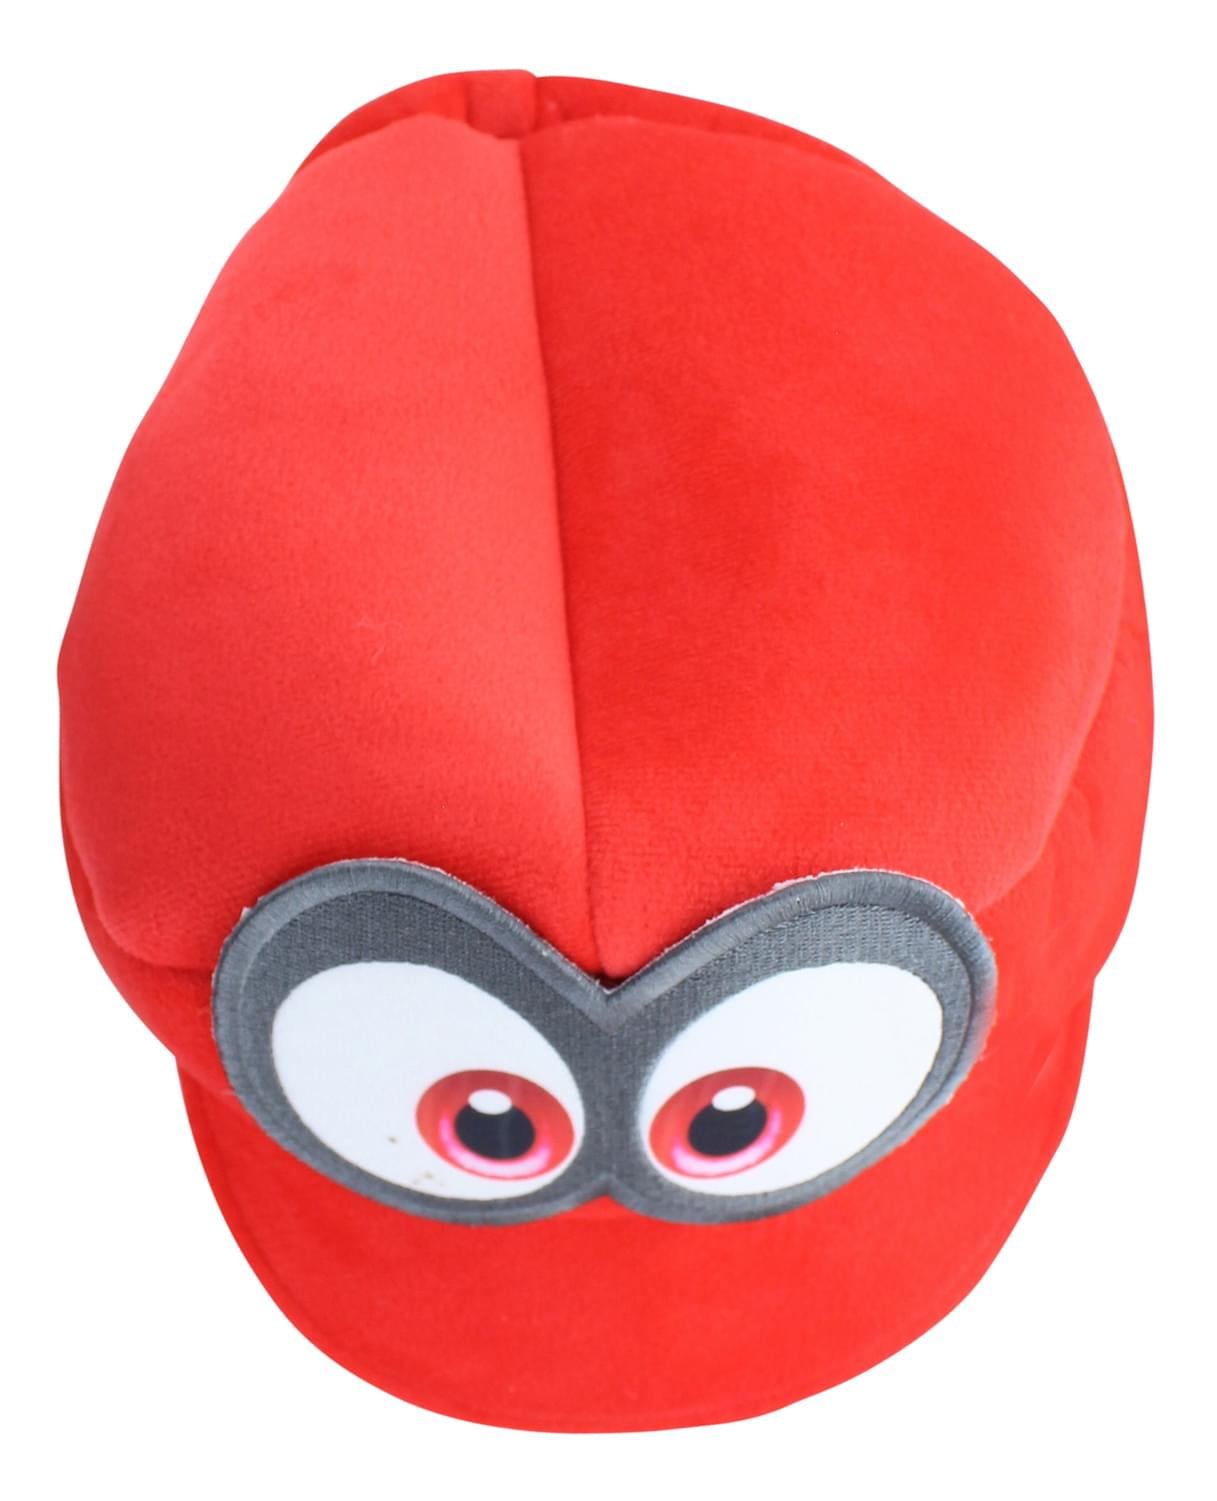 Super Mario Odyssey Cappy Plush Hat Cap Soft Toy Gifts 